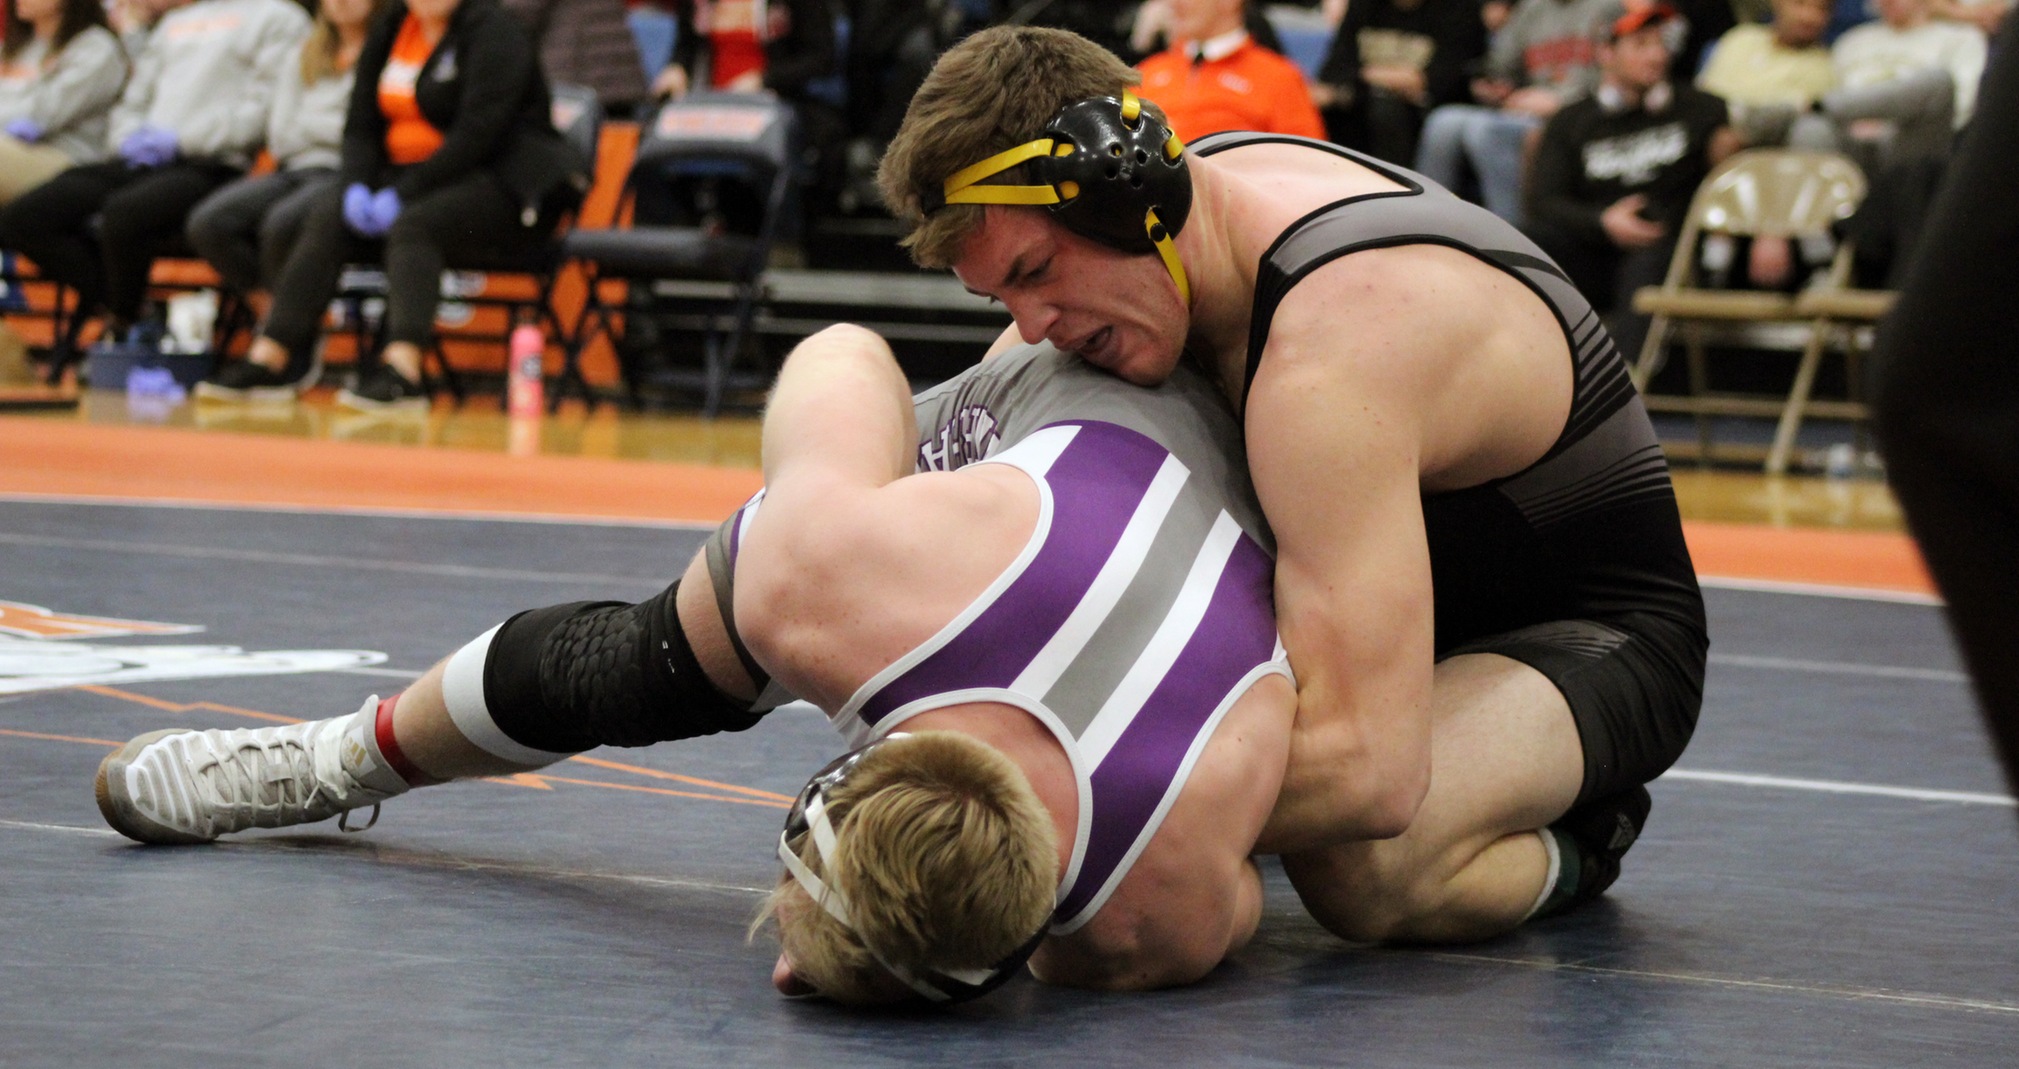 Colten Cashmore finished fourth in the 197-pound weight class with a 4-2 record.